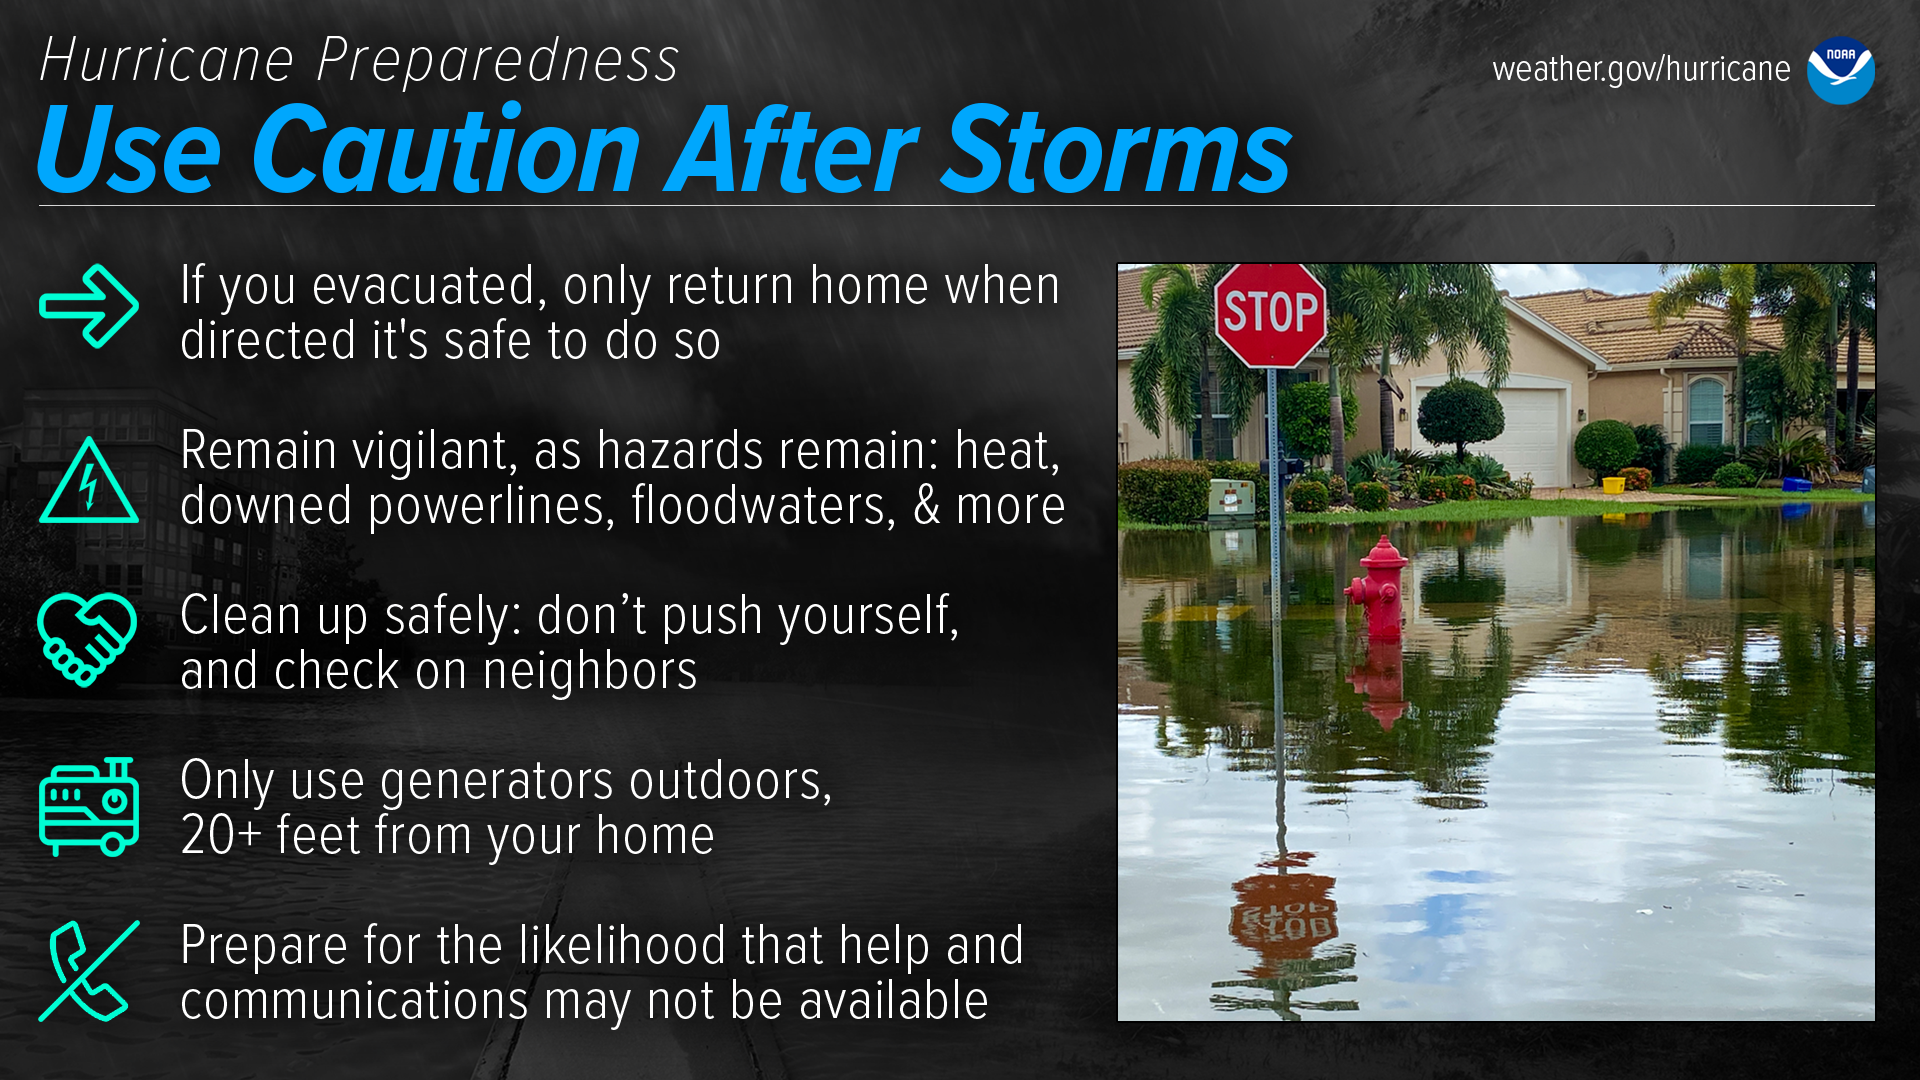 Hurricane Preparedness - Use Caution After Storms. If you evacuated, only return home when directed that its safe to do so. Remain vigilant, as hazards remain: heat, downed power lines, floodwaters, and more. Clean up safely: don't push yourself, and check on neighbors. Only use generators outdoors, 20+ feet from your home. Prepare for the likelihood that help and communications may not be available. (Image credit: NOAA's National Weather Service) 